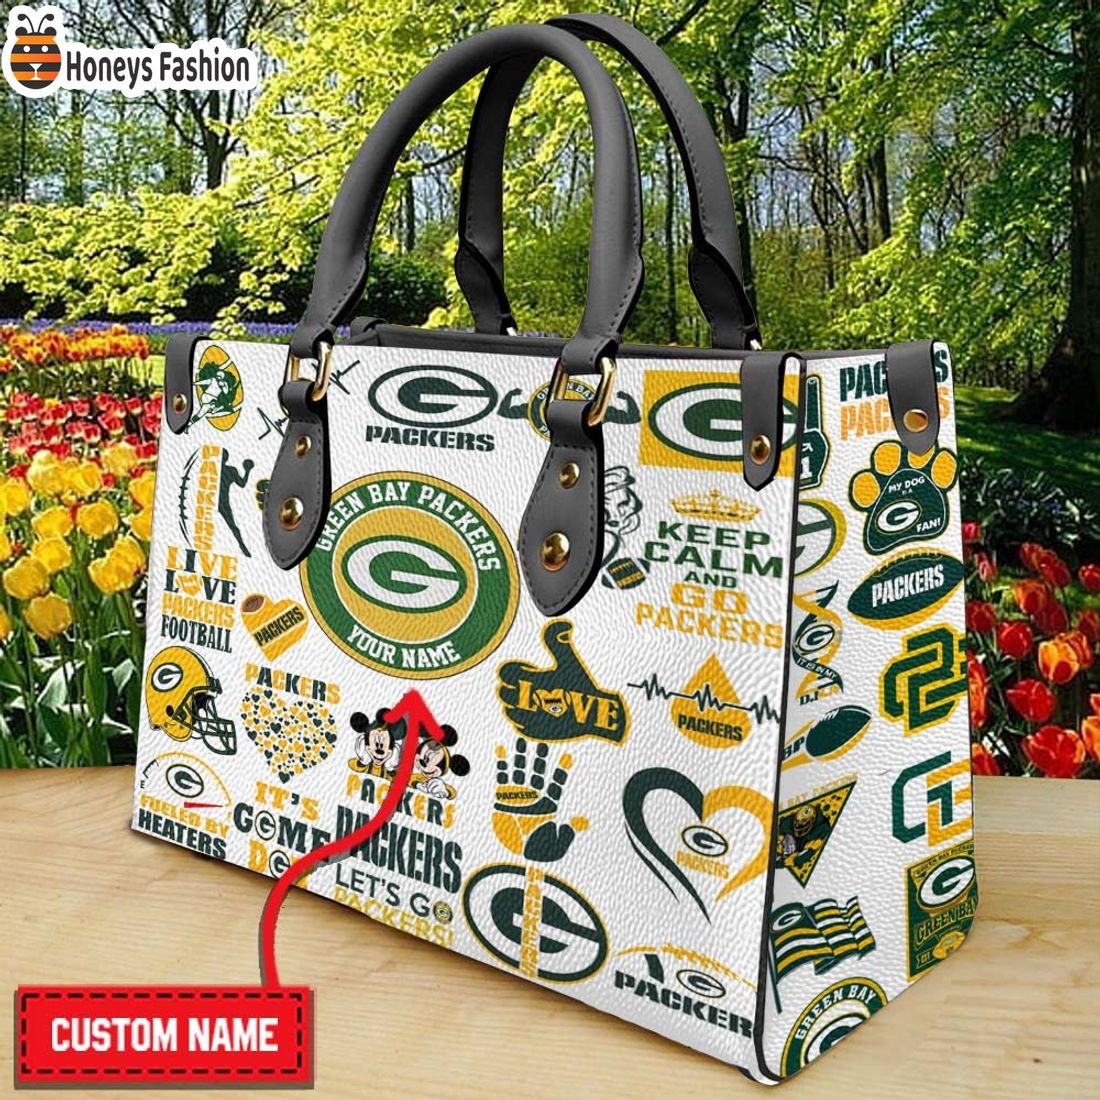 Green Bay Packers Personalized Leather Handbag